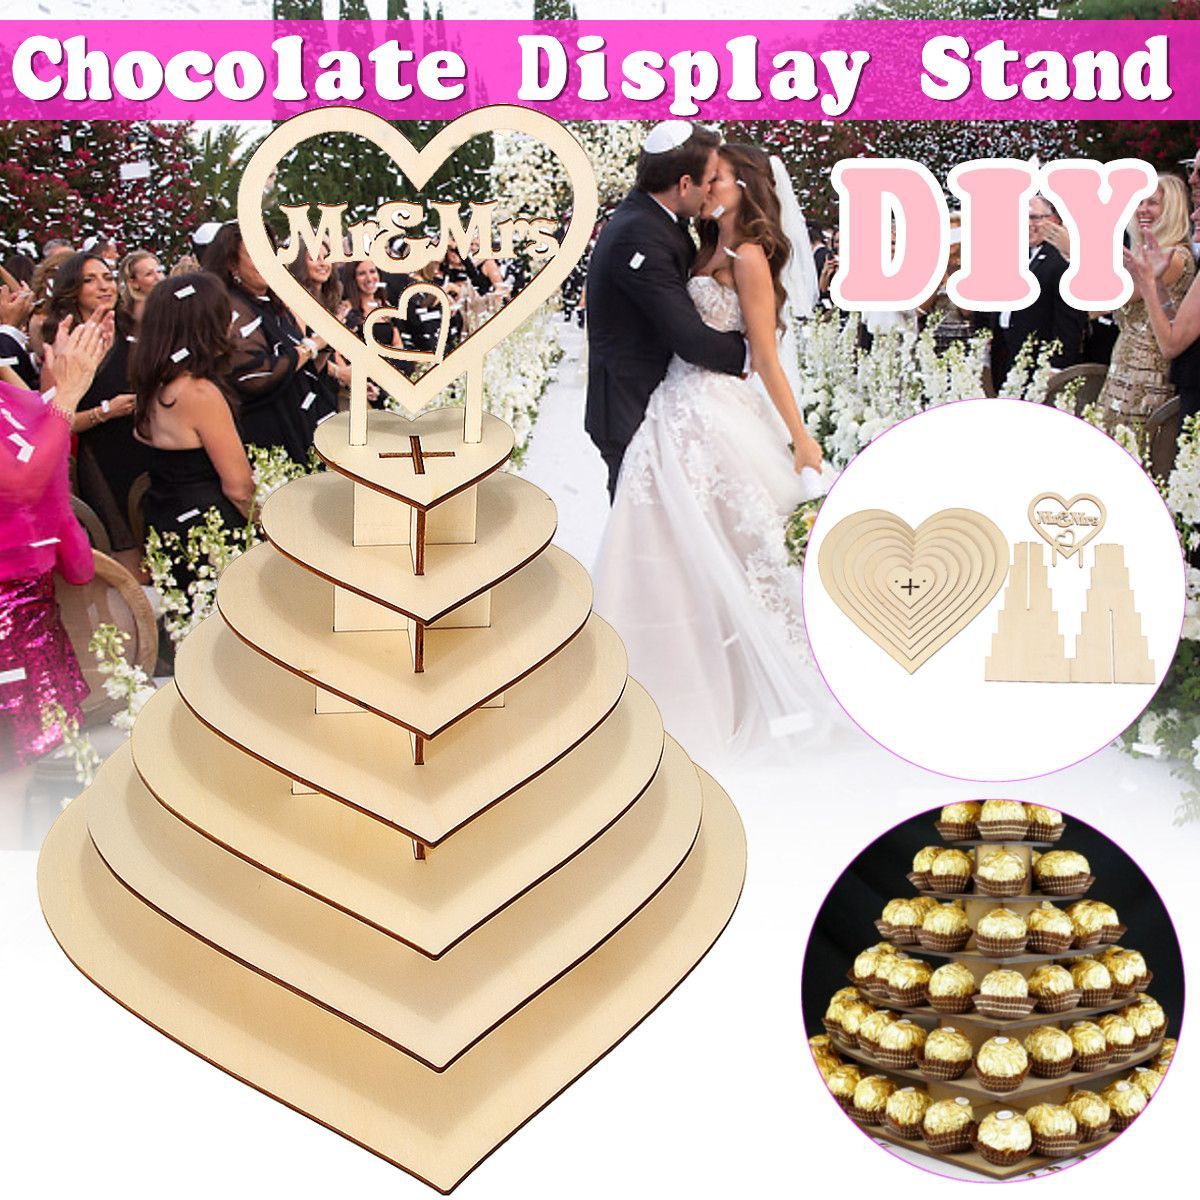 Personalised-Chocolate-Snack-Display-MrMrs-Heart-Wedding-Dessert-Stand-Shelf-Rack-Party-Centrepiece-1635506